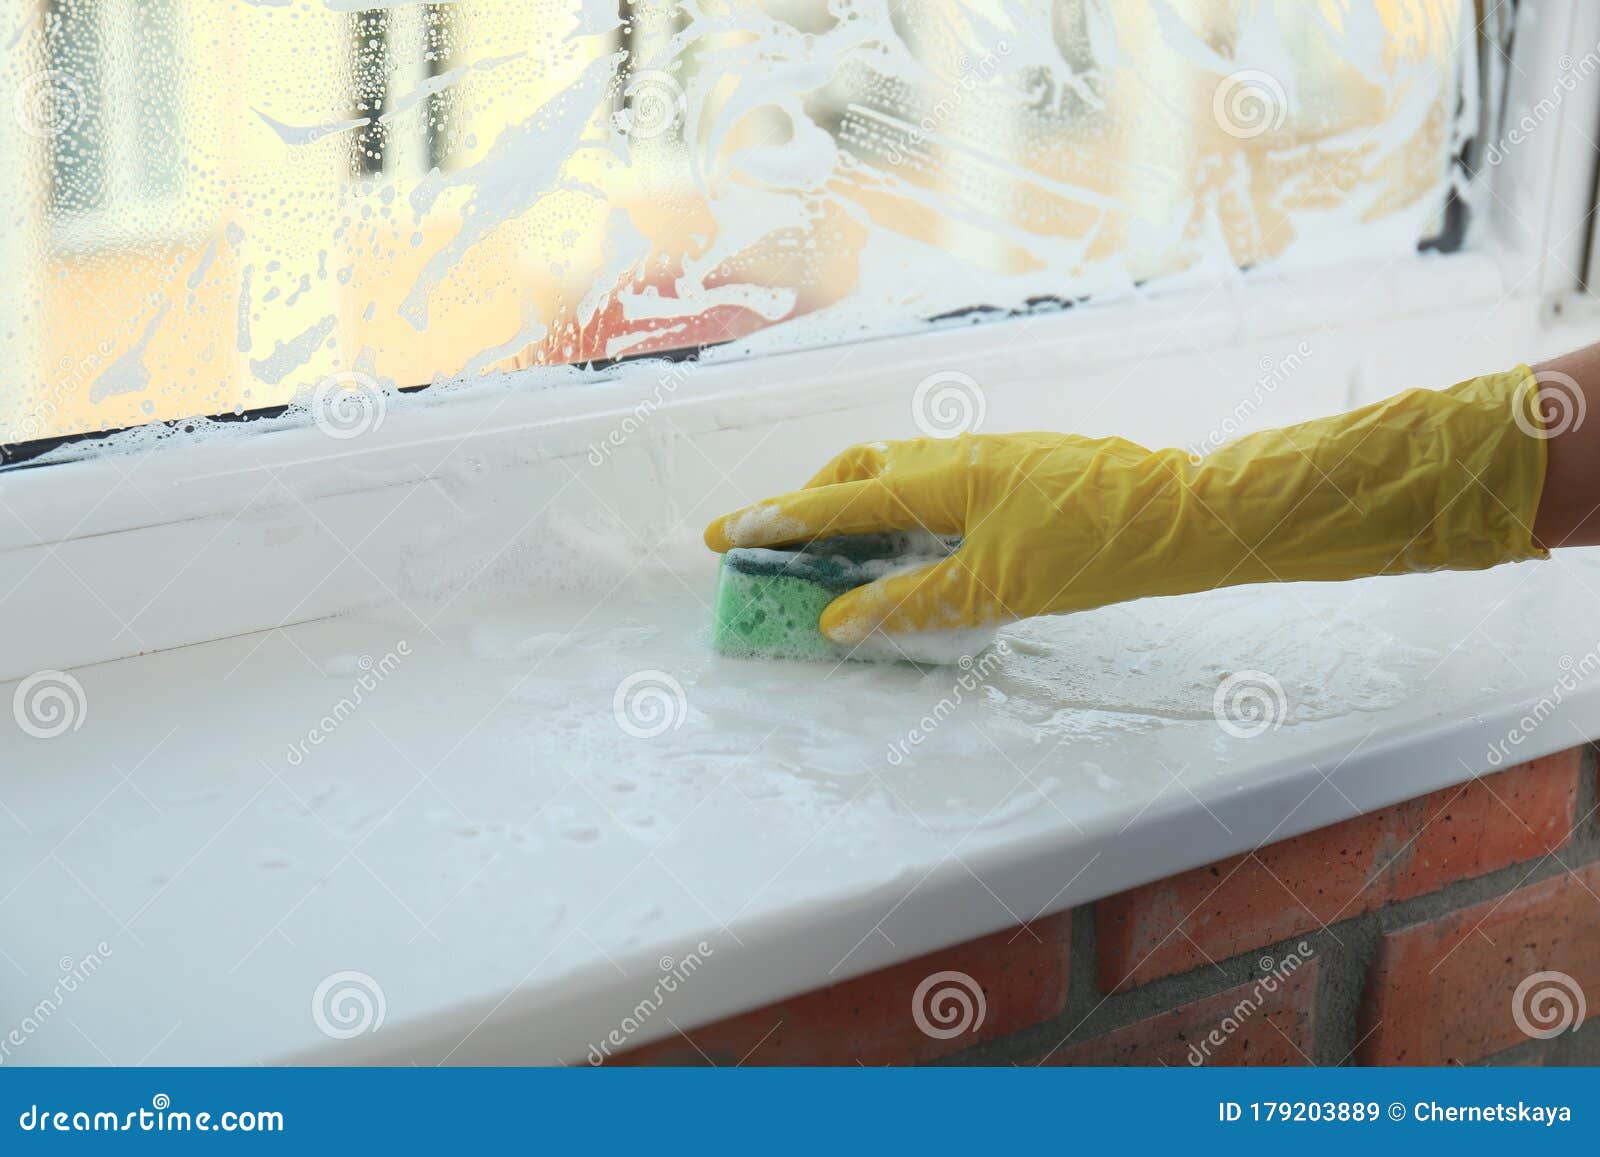 10+ Hundred Cleaning Window Sills Royalty-Free Images, Stock